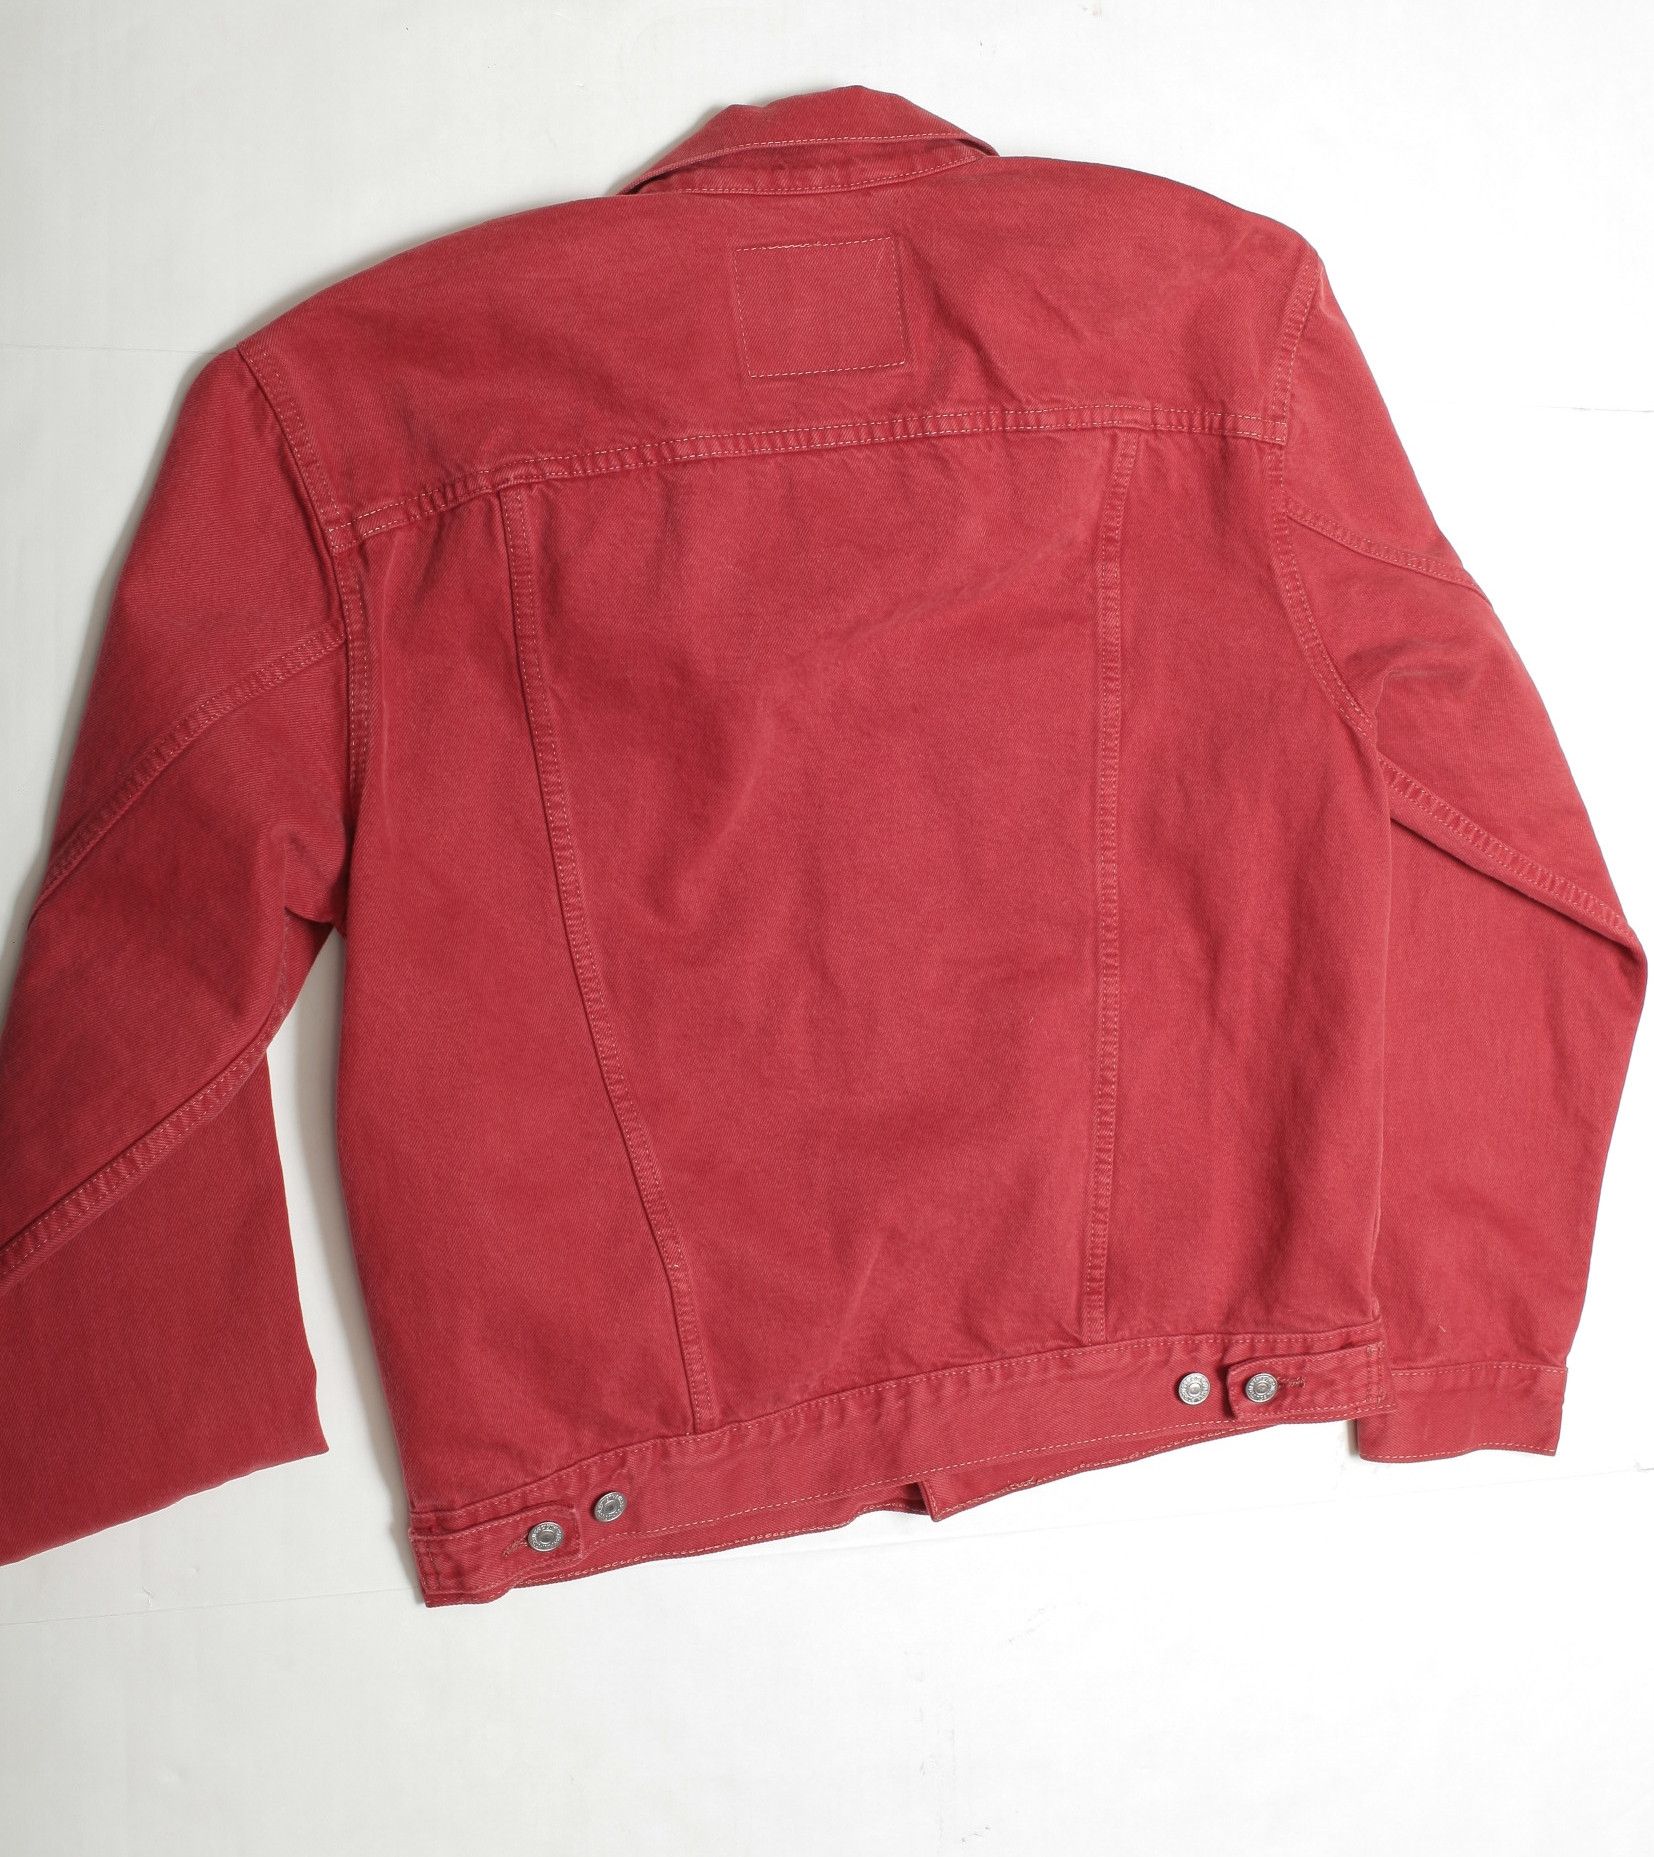 Levi's Red Made in USA Denim Trucker jacket Size US M / EU 48-50 / 2 - 3 Preview